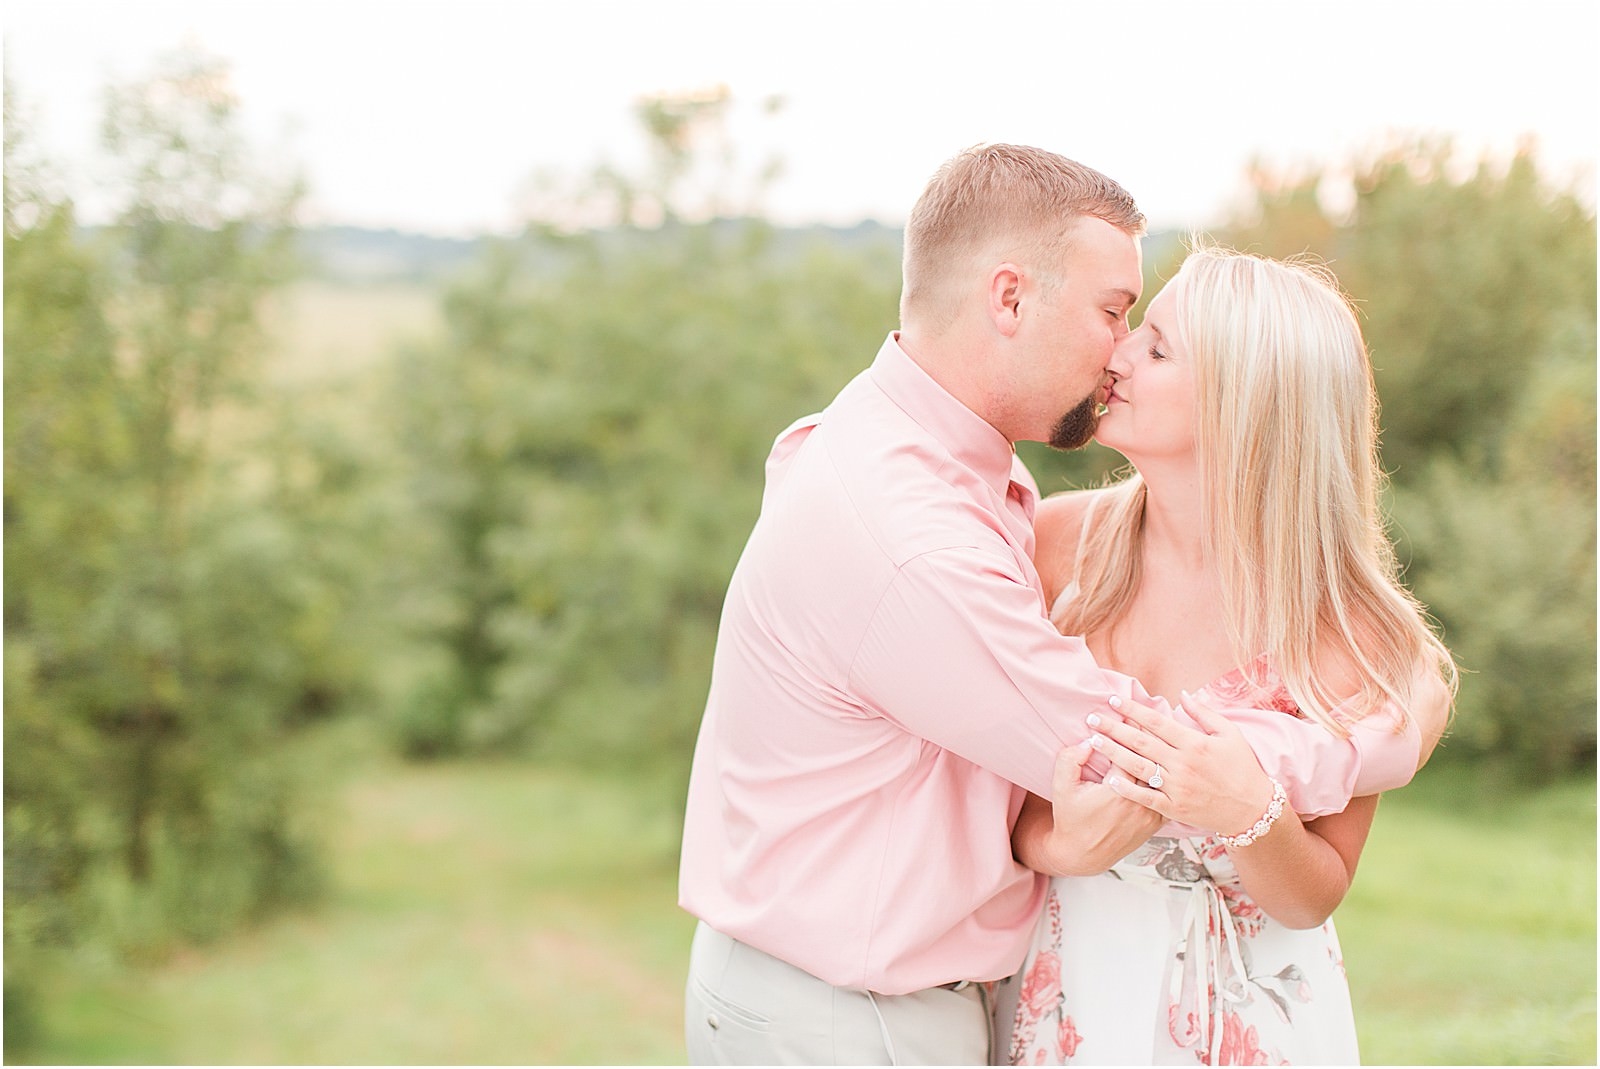 Lauren and Bryce | The Corner House B&ed and Breakfast Engagement Session | Bret and Brandie Photography 023.jpg